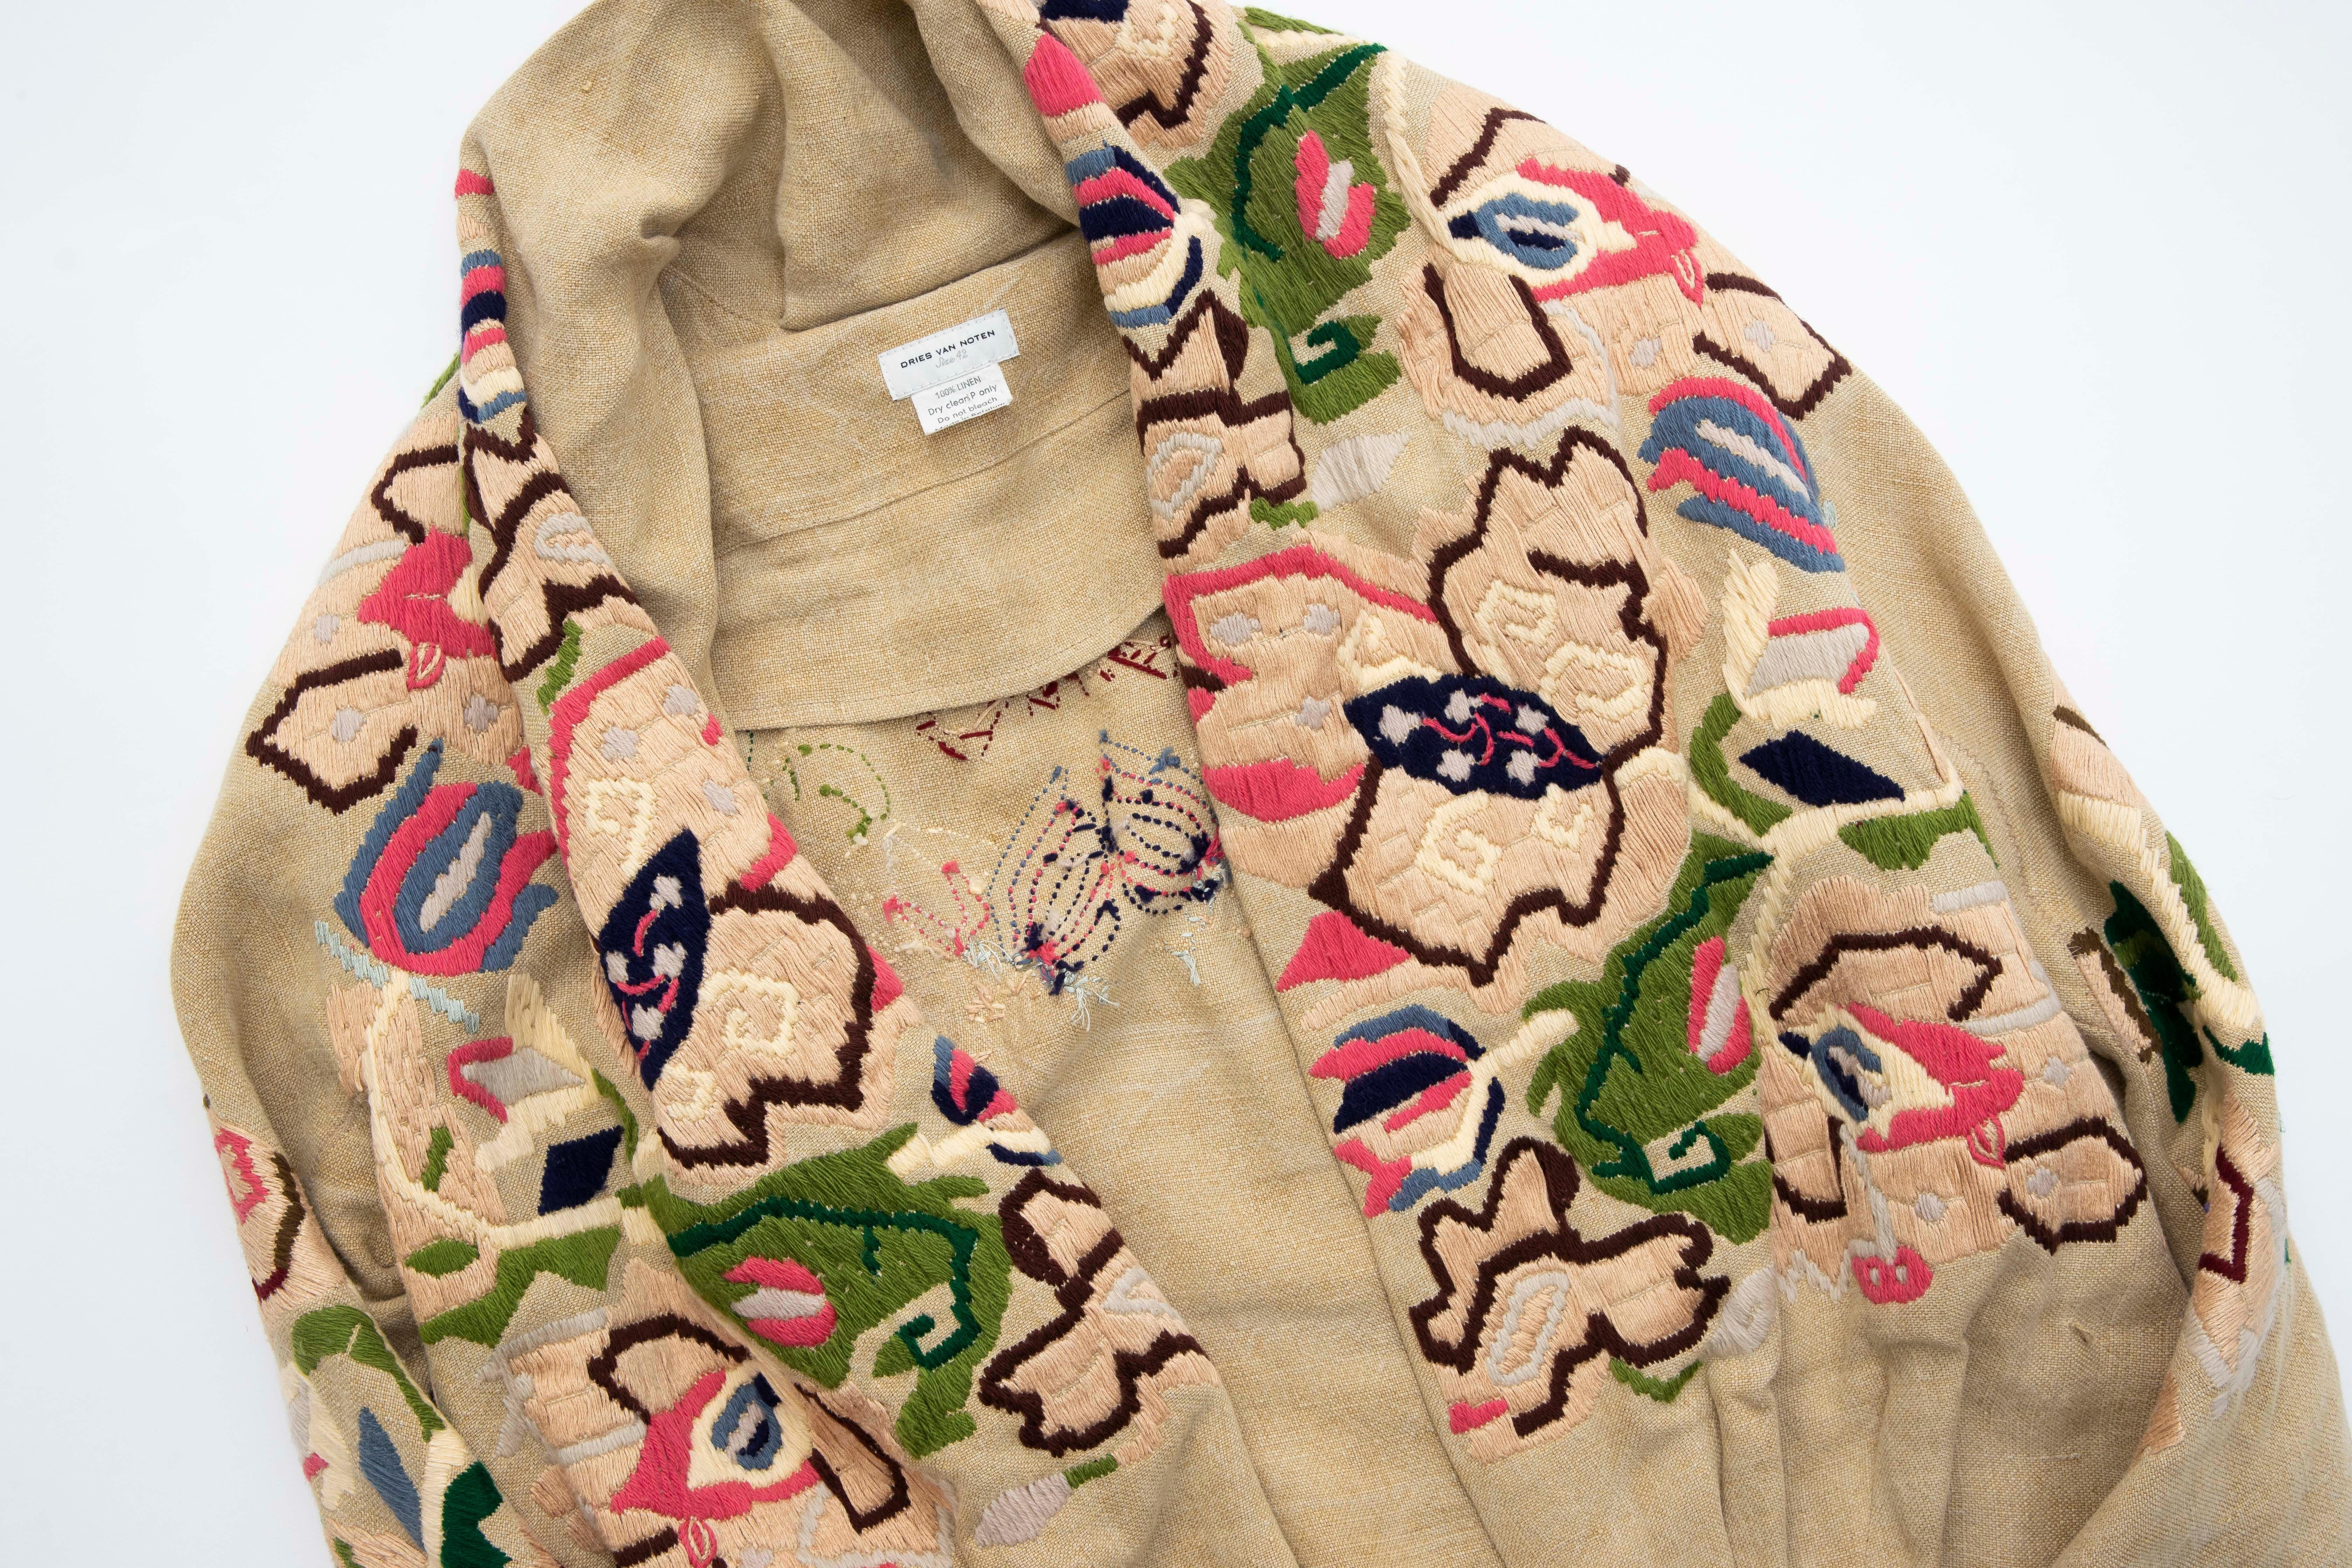 Dries Van Noten Runway Floral Embroidered Linen Jacket, Fall 2002 For Sale 5